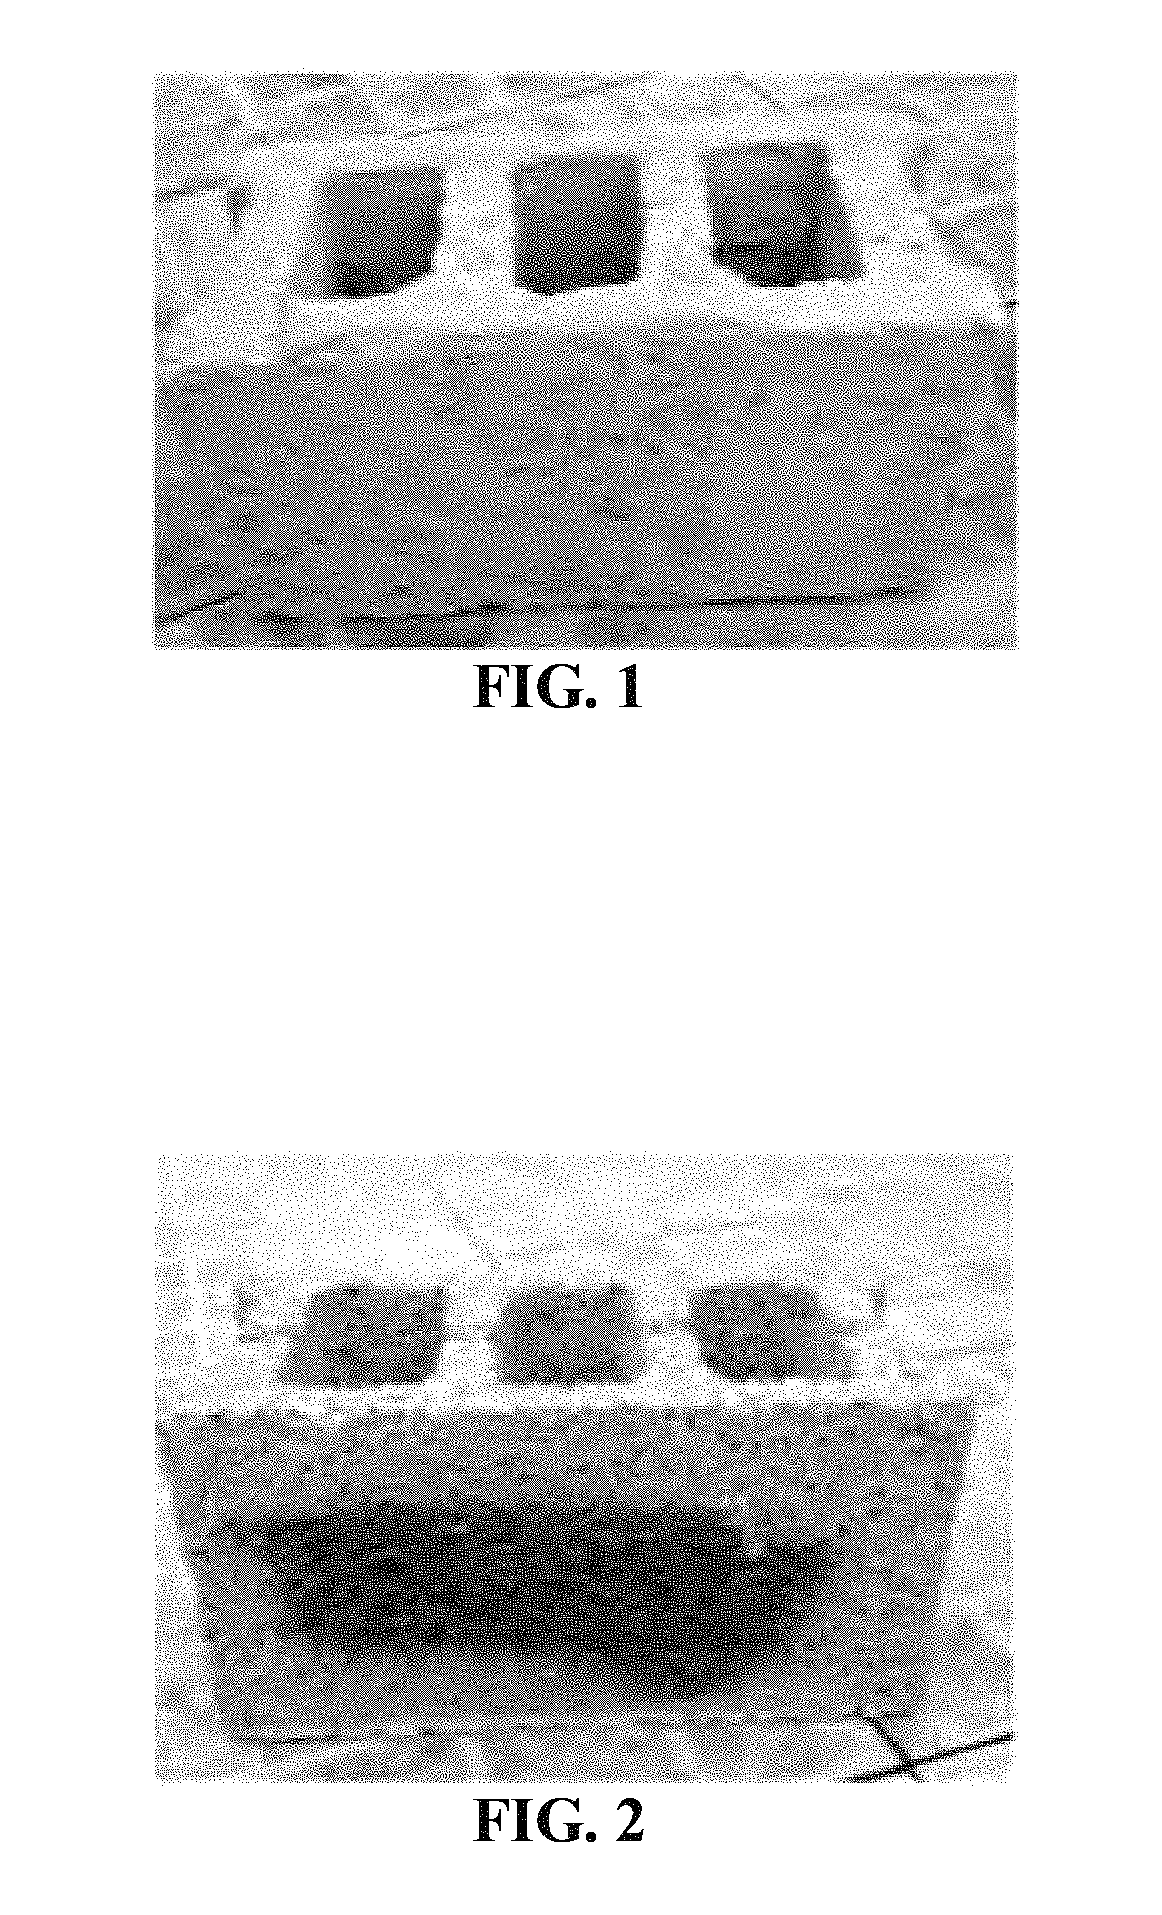 Crumb rubber-containing composites and masonry blocks thereof